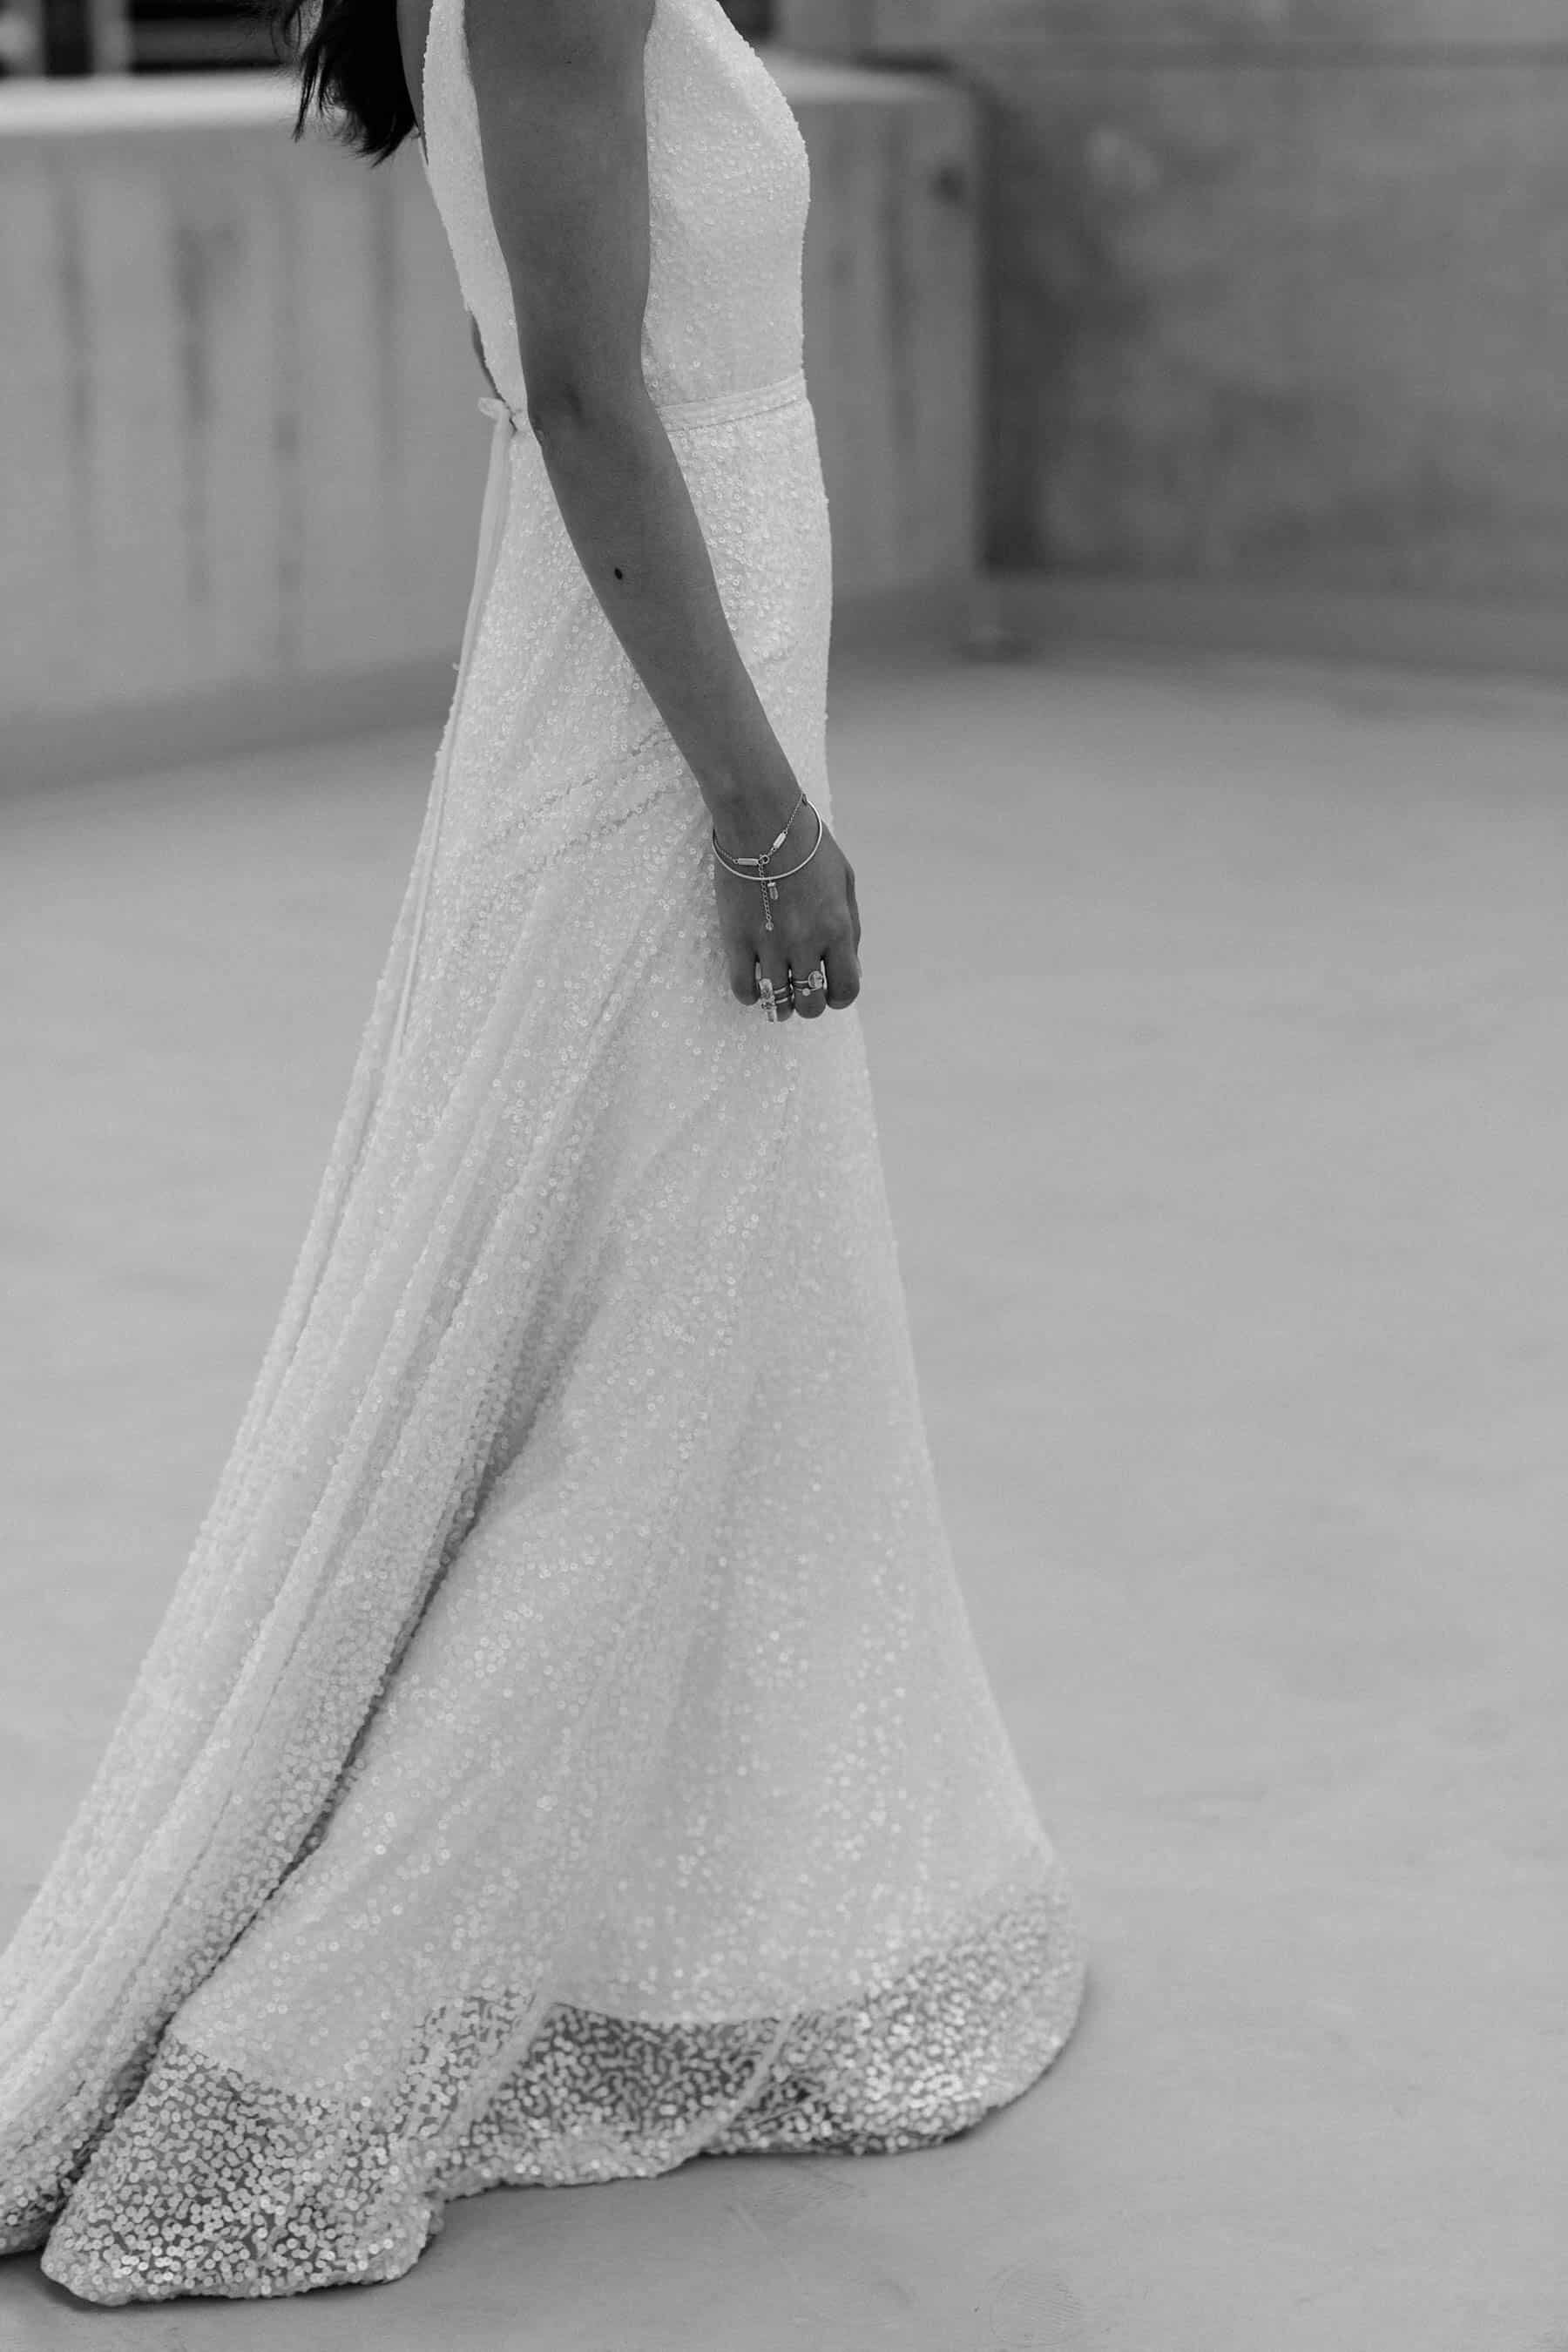 LUNA the new sequinned bridal collection by Karen Willis Holmes